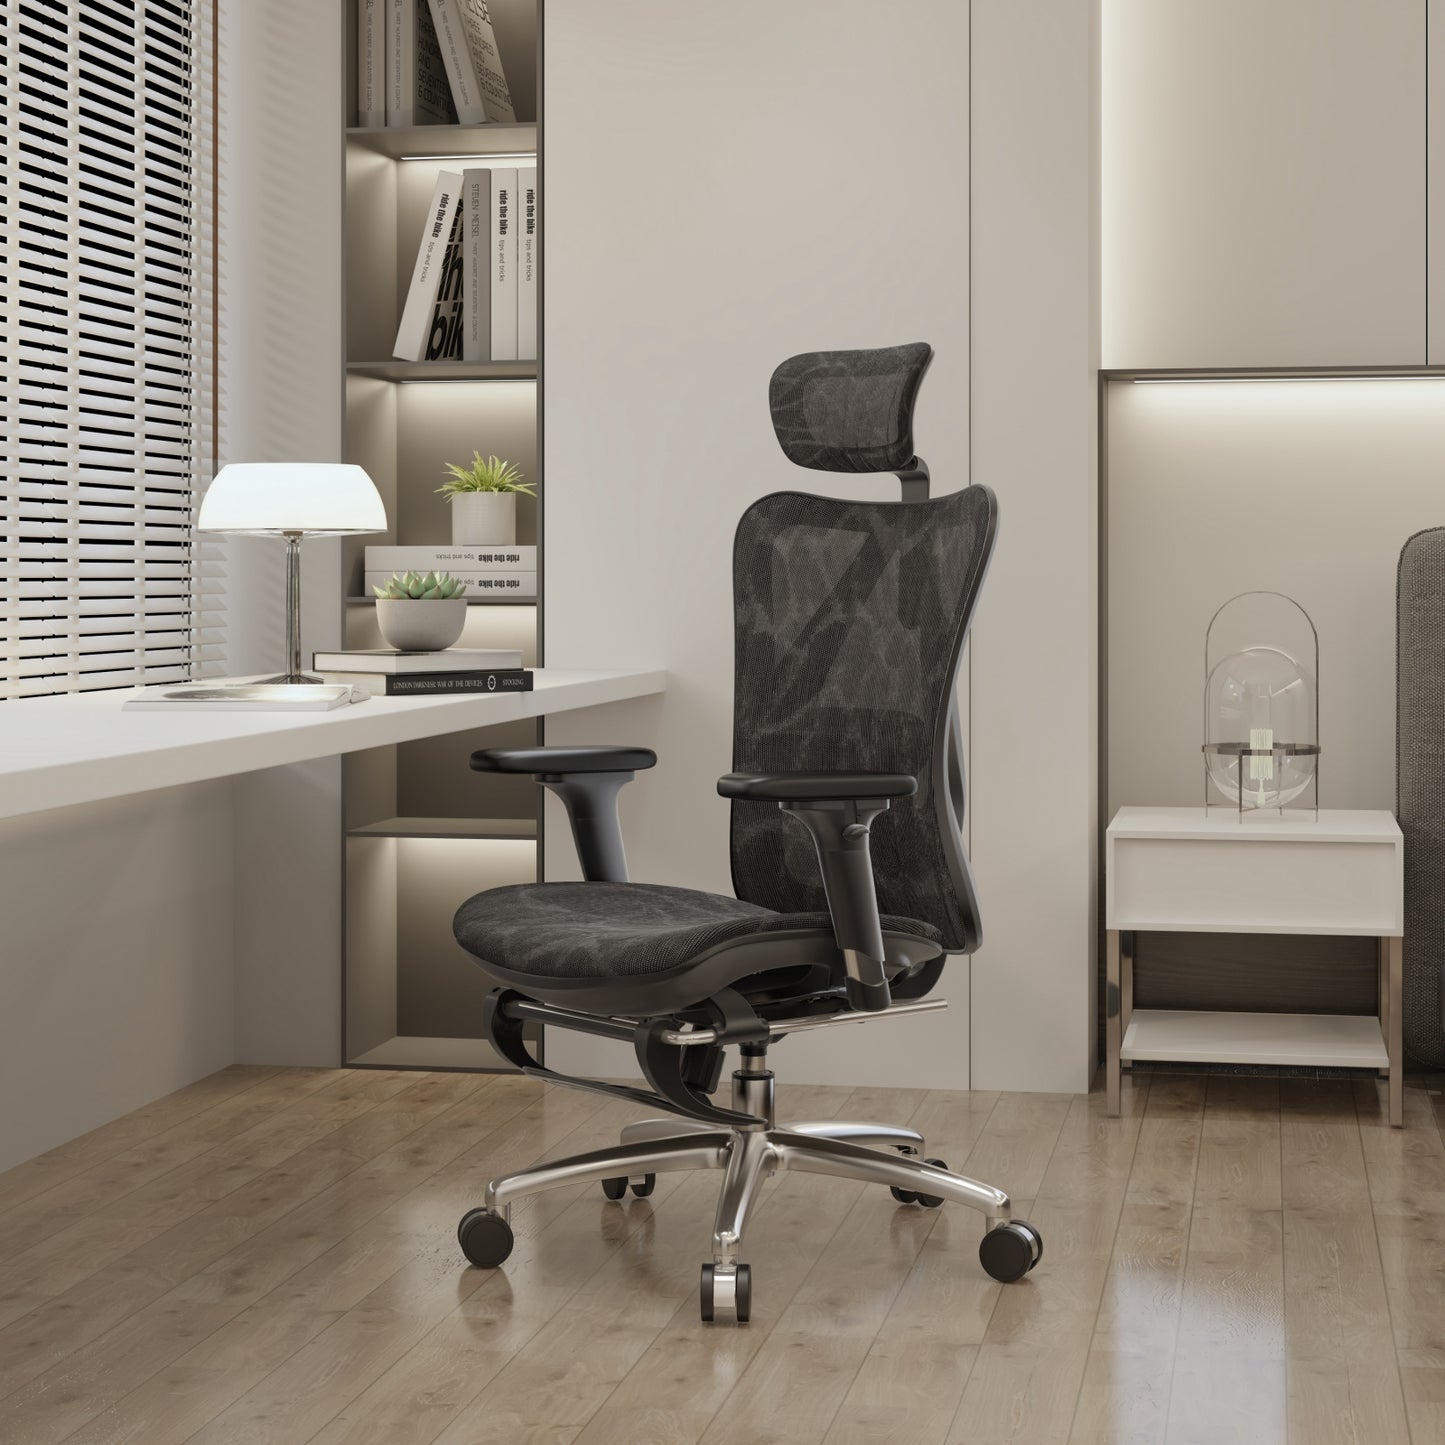 Sihoo M57 Ergonomic Chair WFR (with built-in footrest)